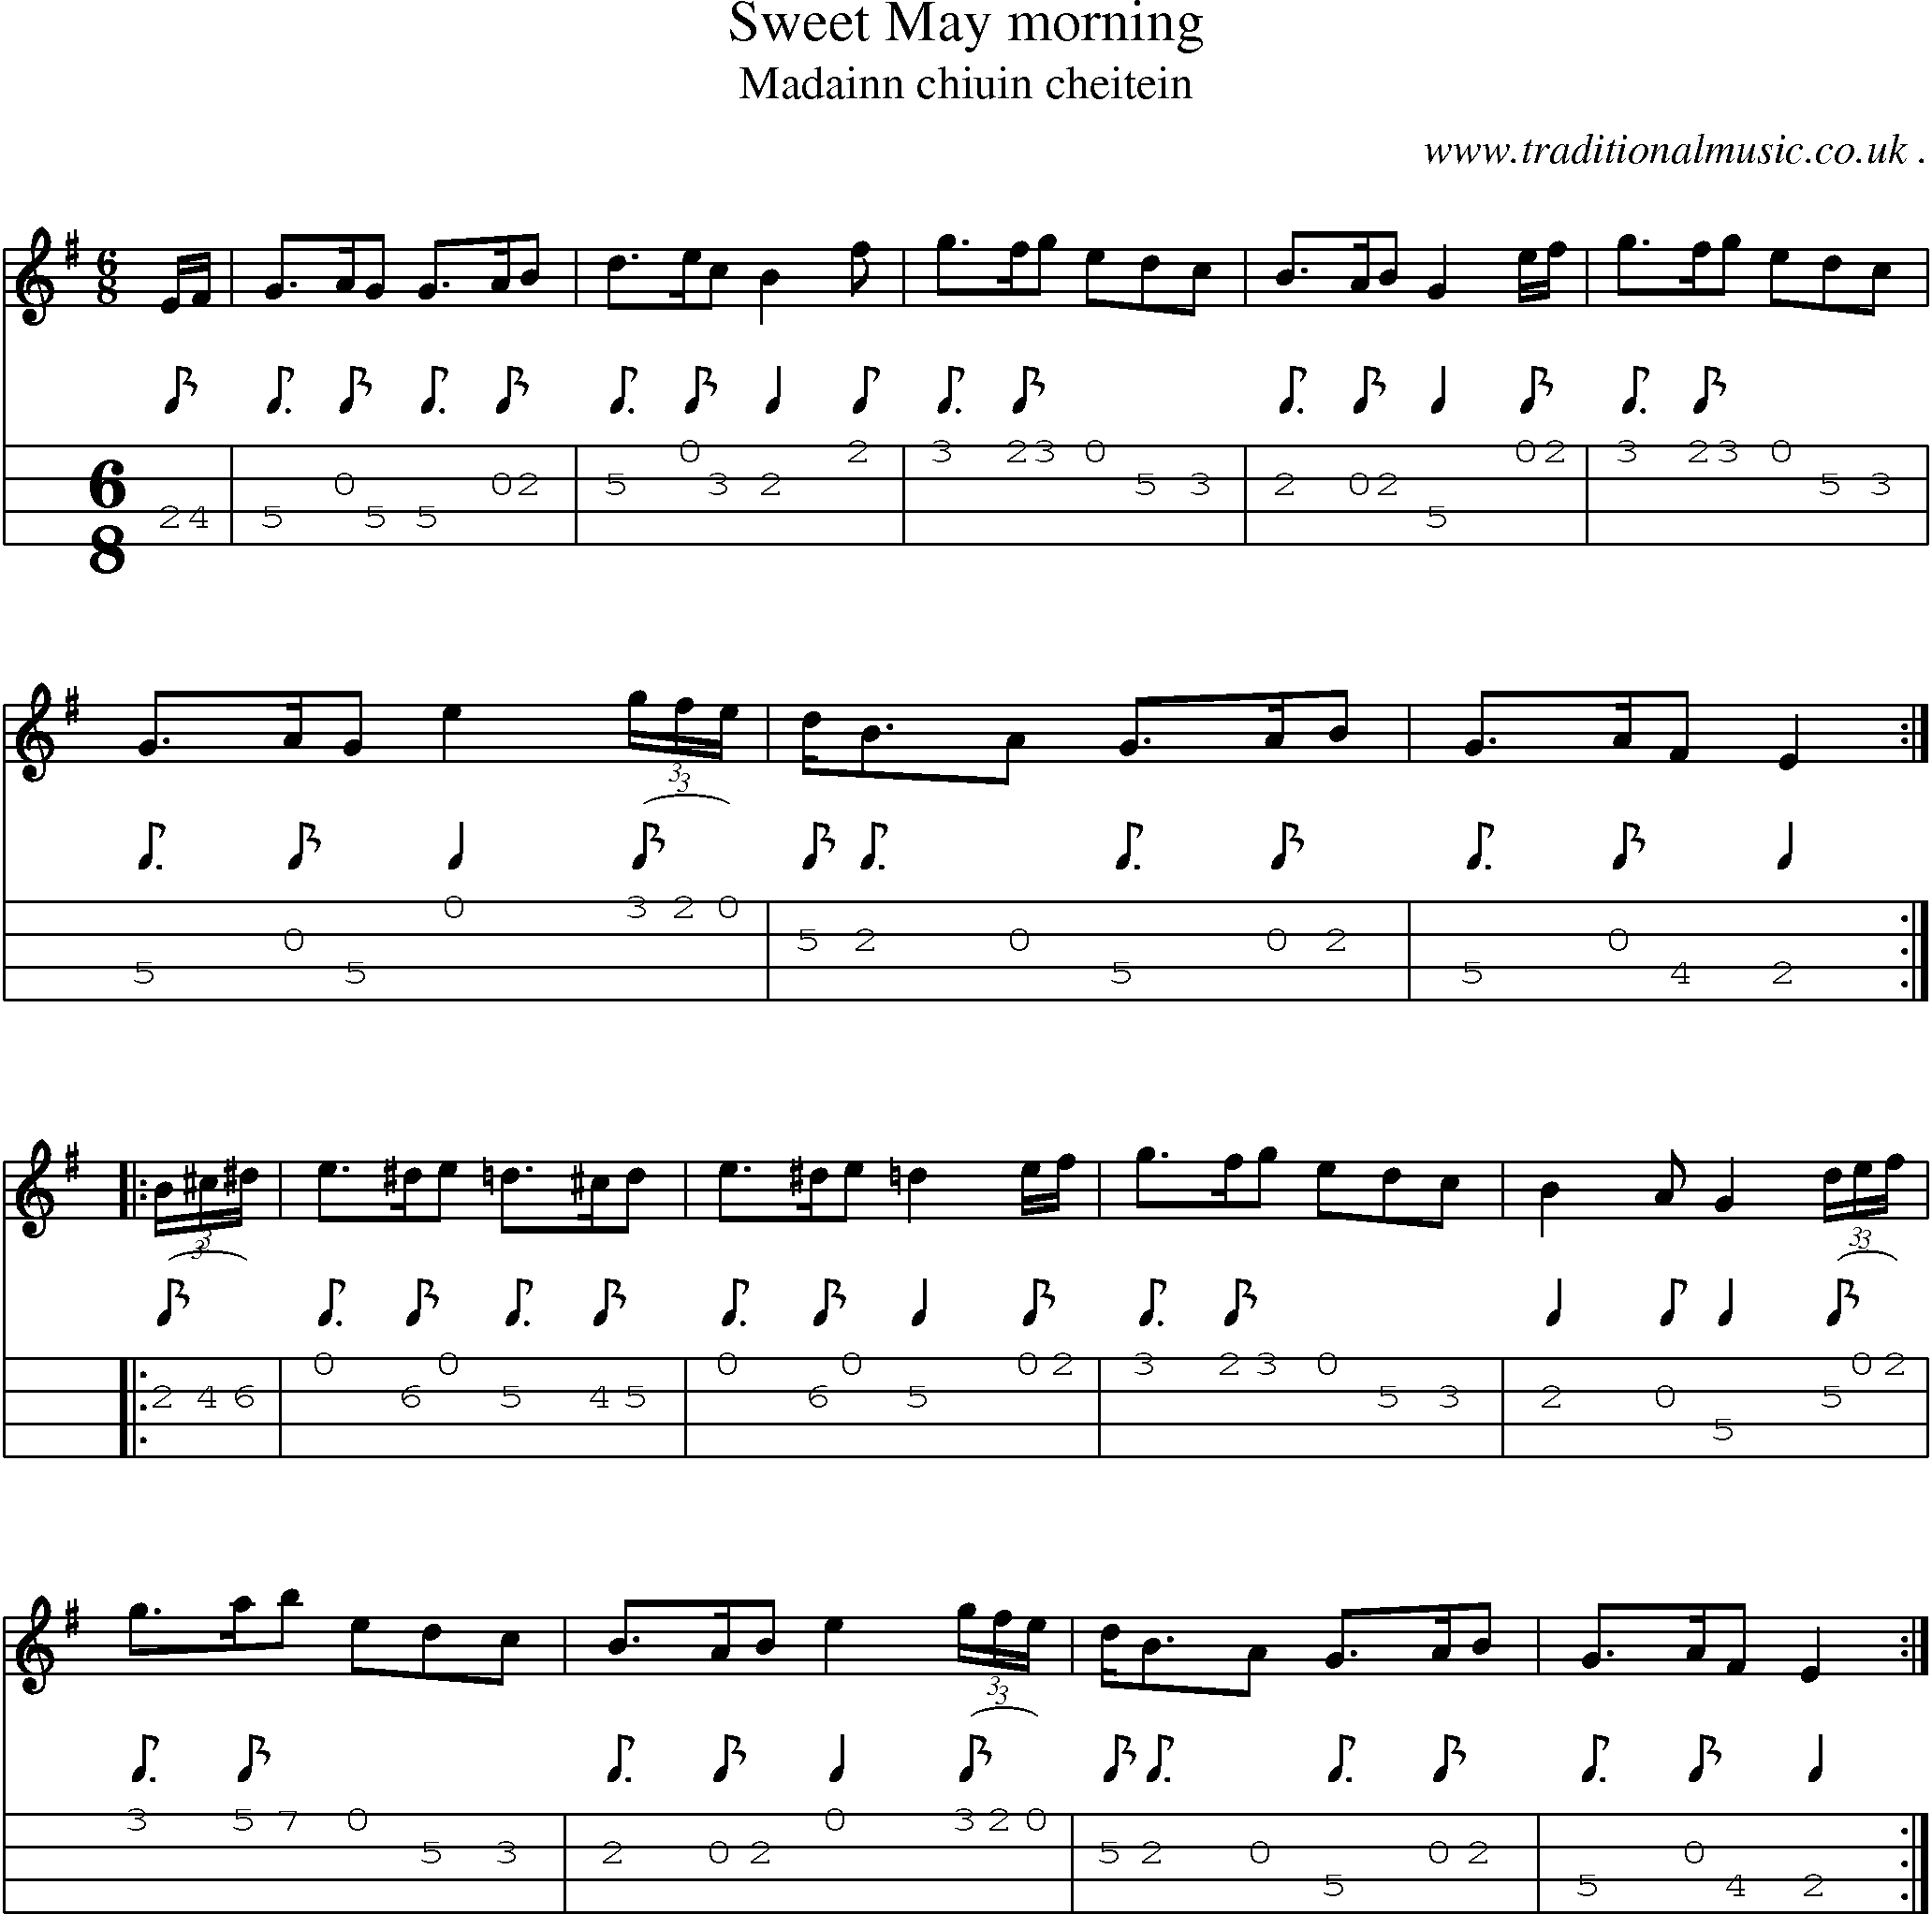 Sheet-music  score, Chords and Mandolin Tabs for Sweet May Morning